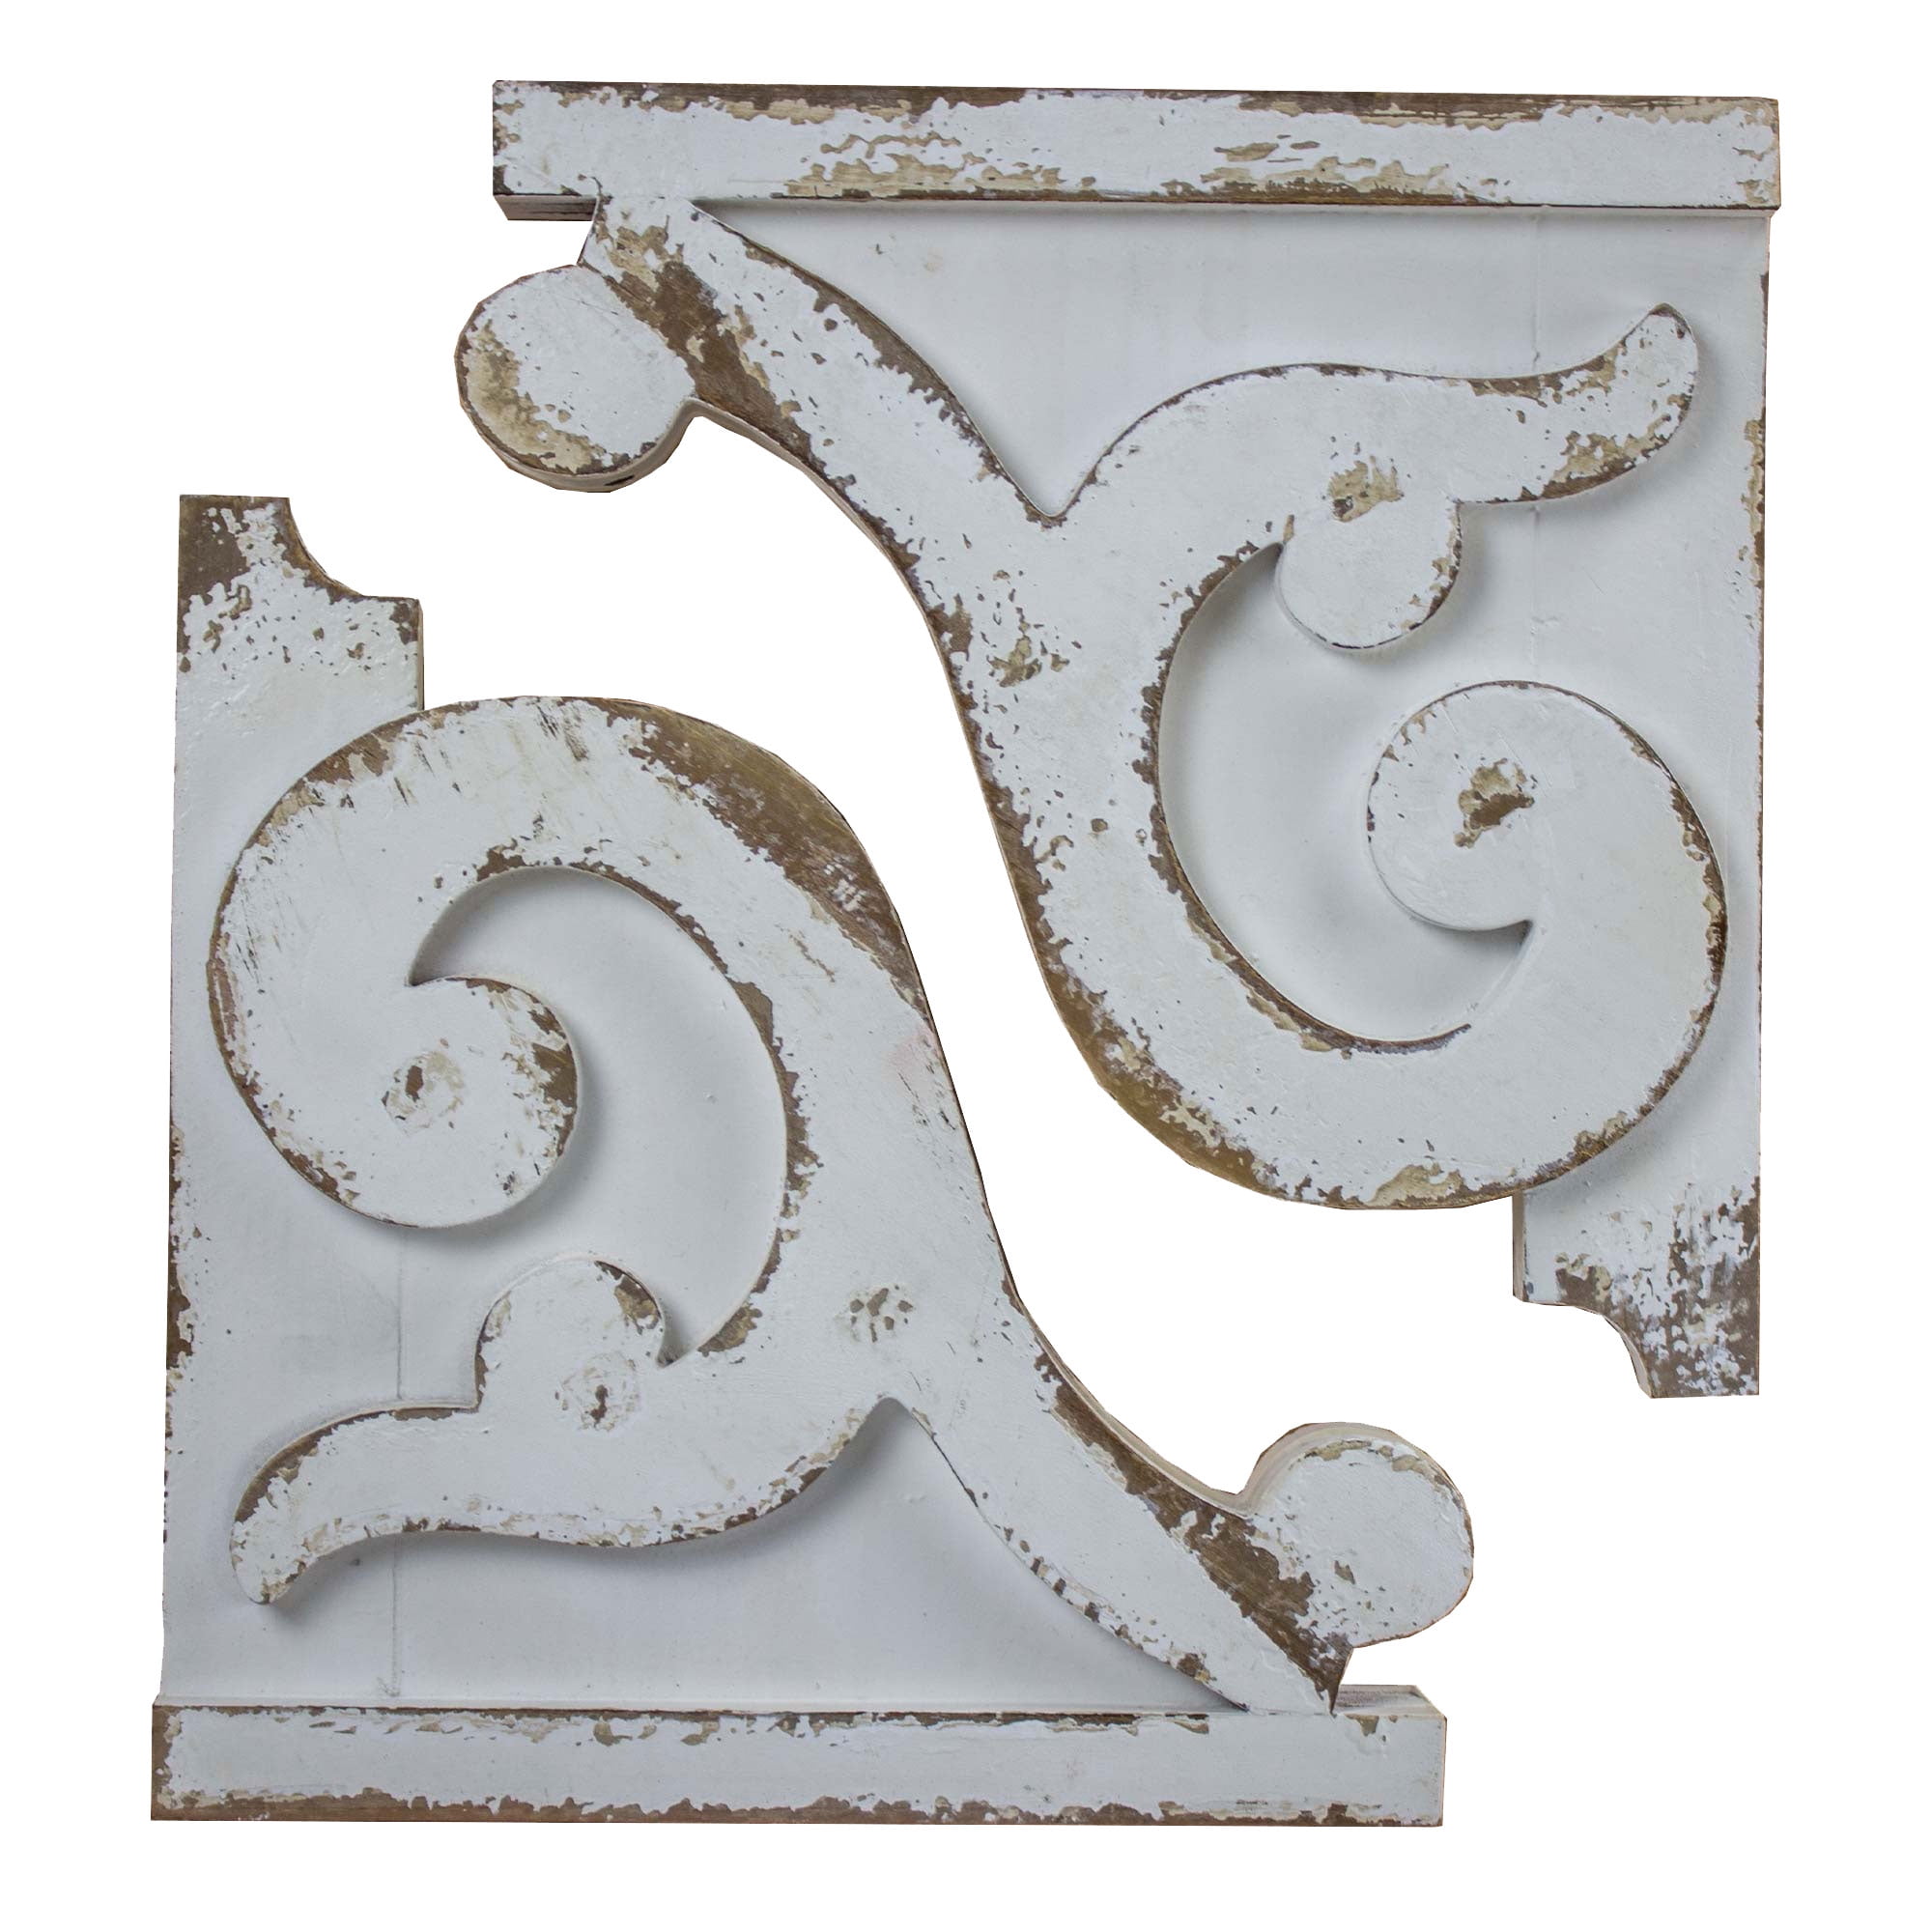 LAUGHING FACE WALL CORBEL BRACKET SHELF ARCHITECTURAL ACCENT HOME DECOR 